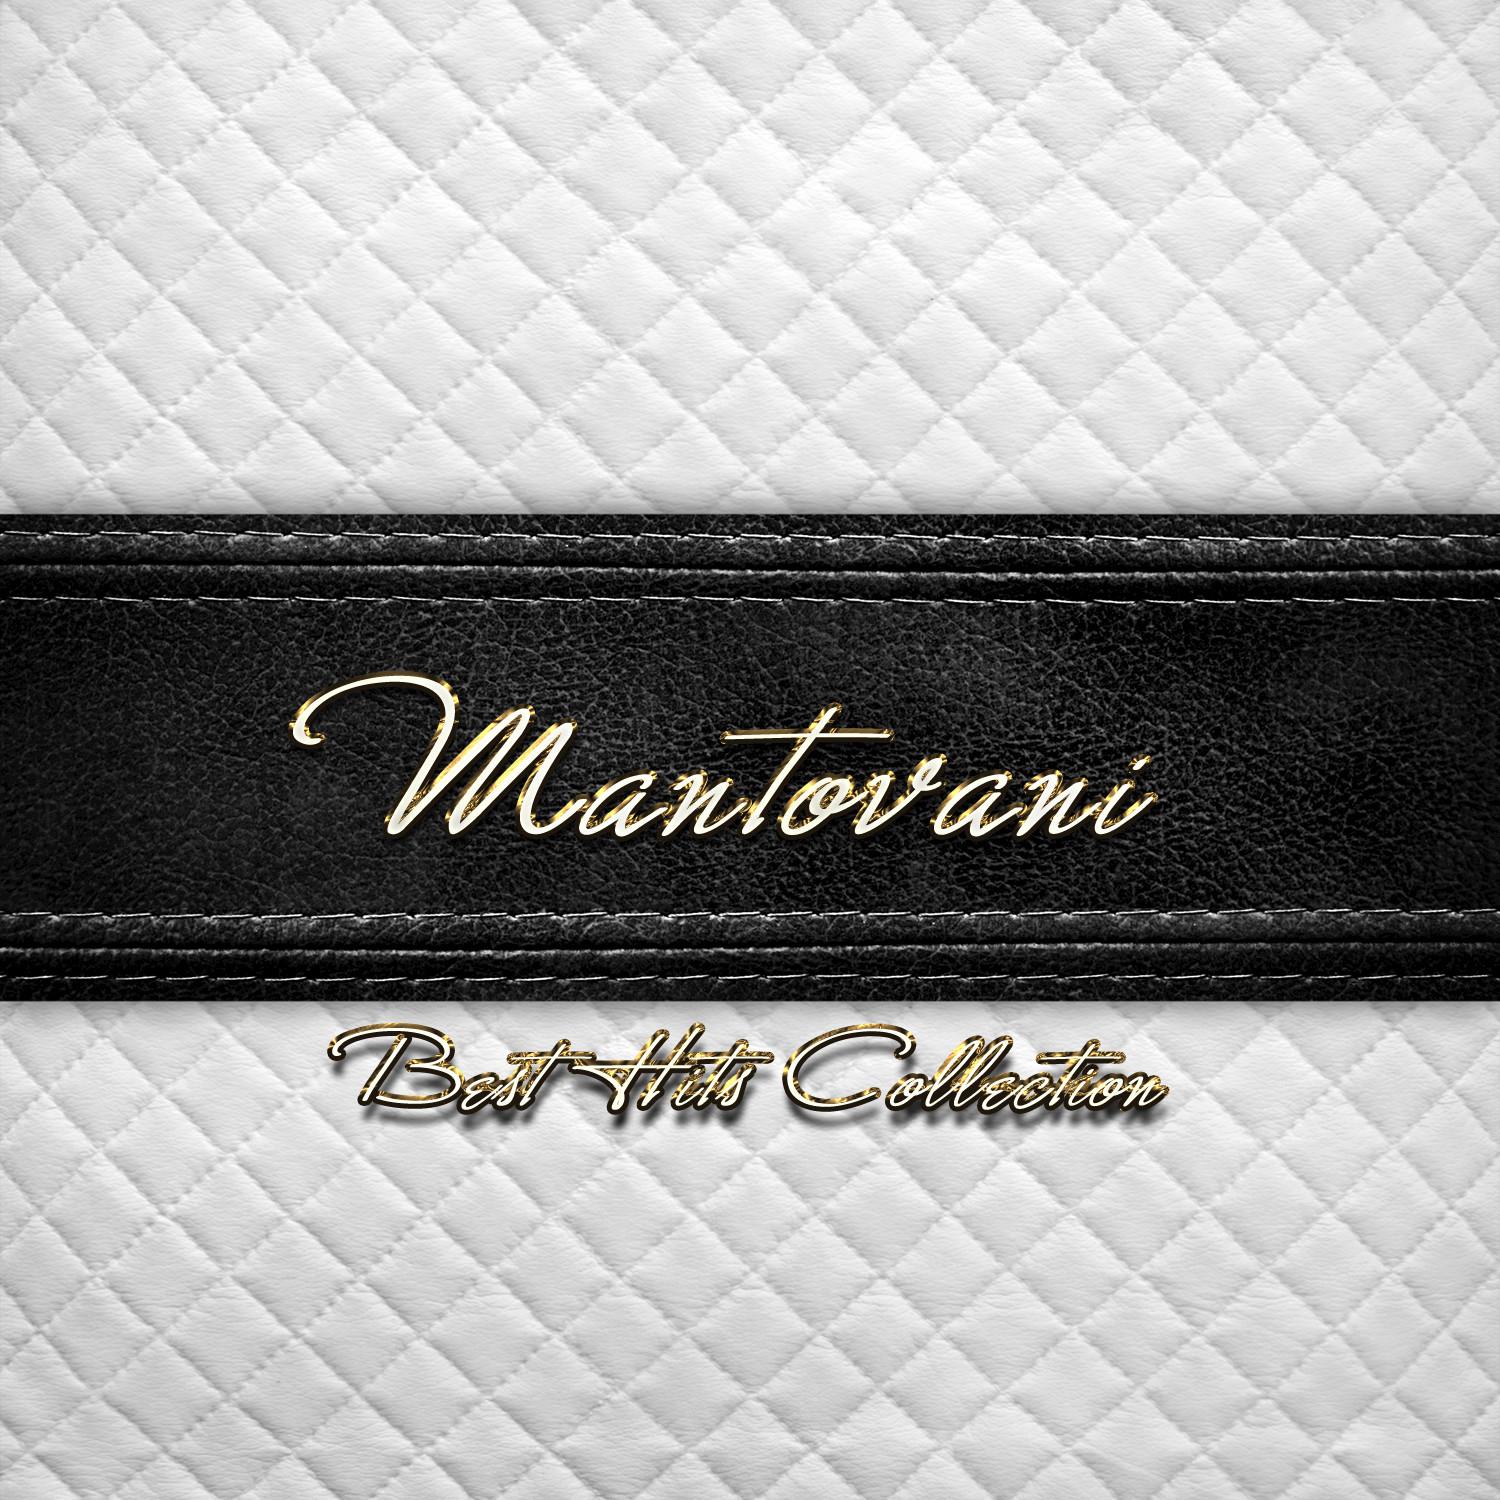 Best Hits Collection of Mantovani